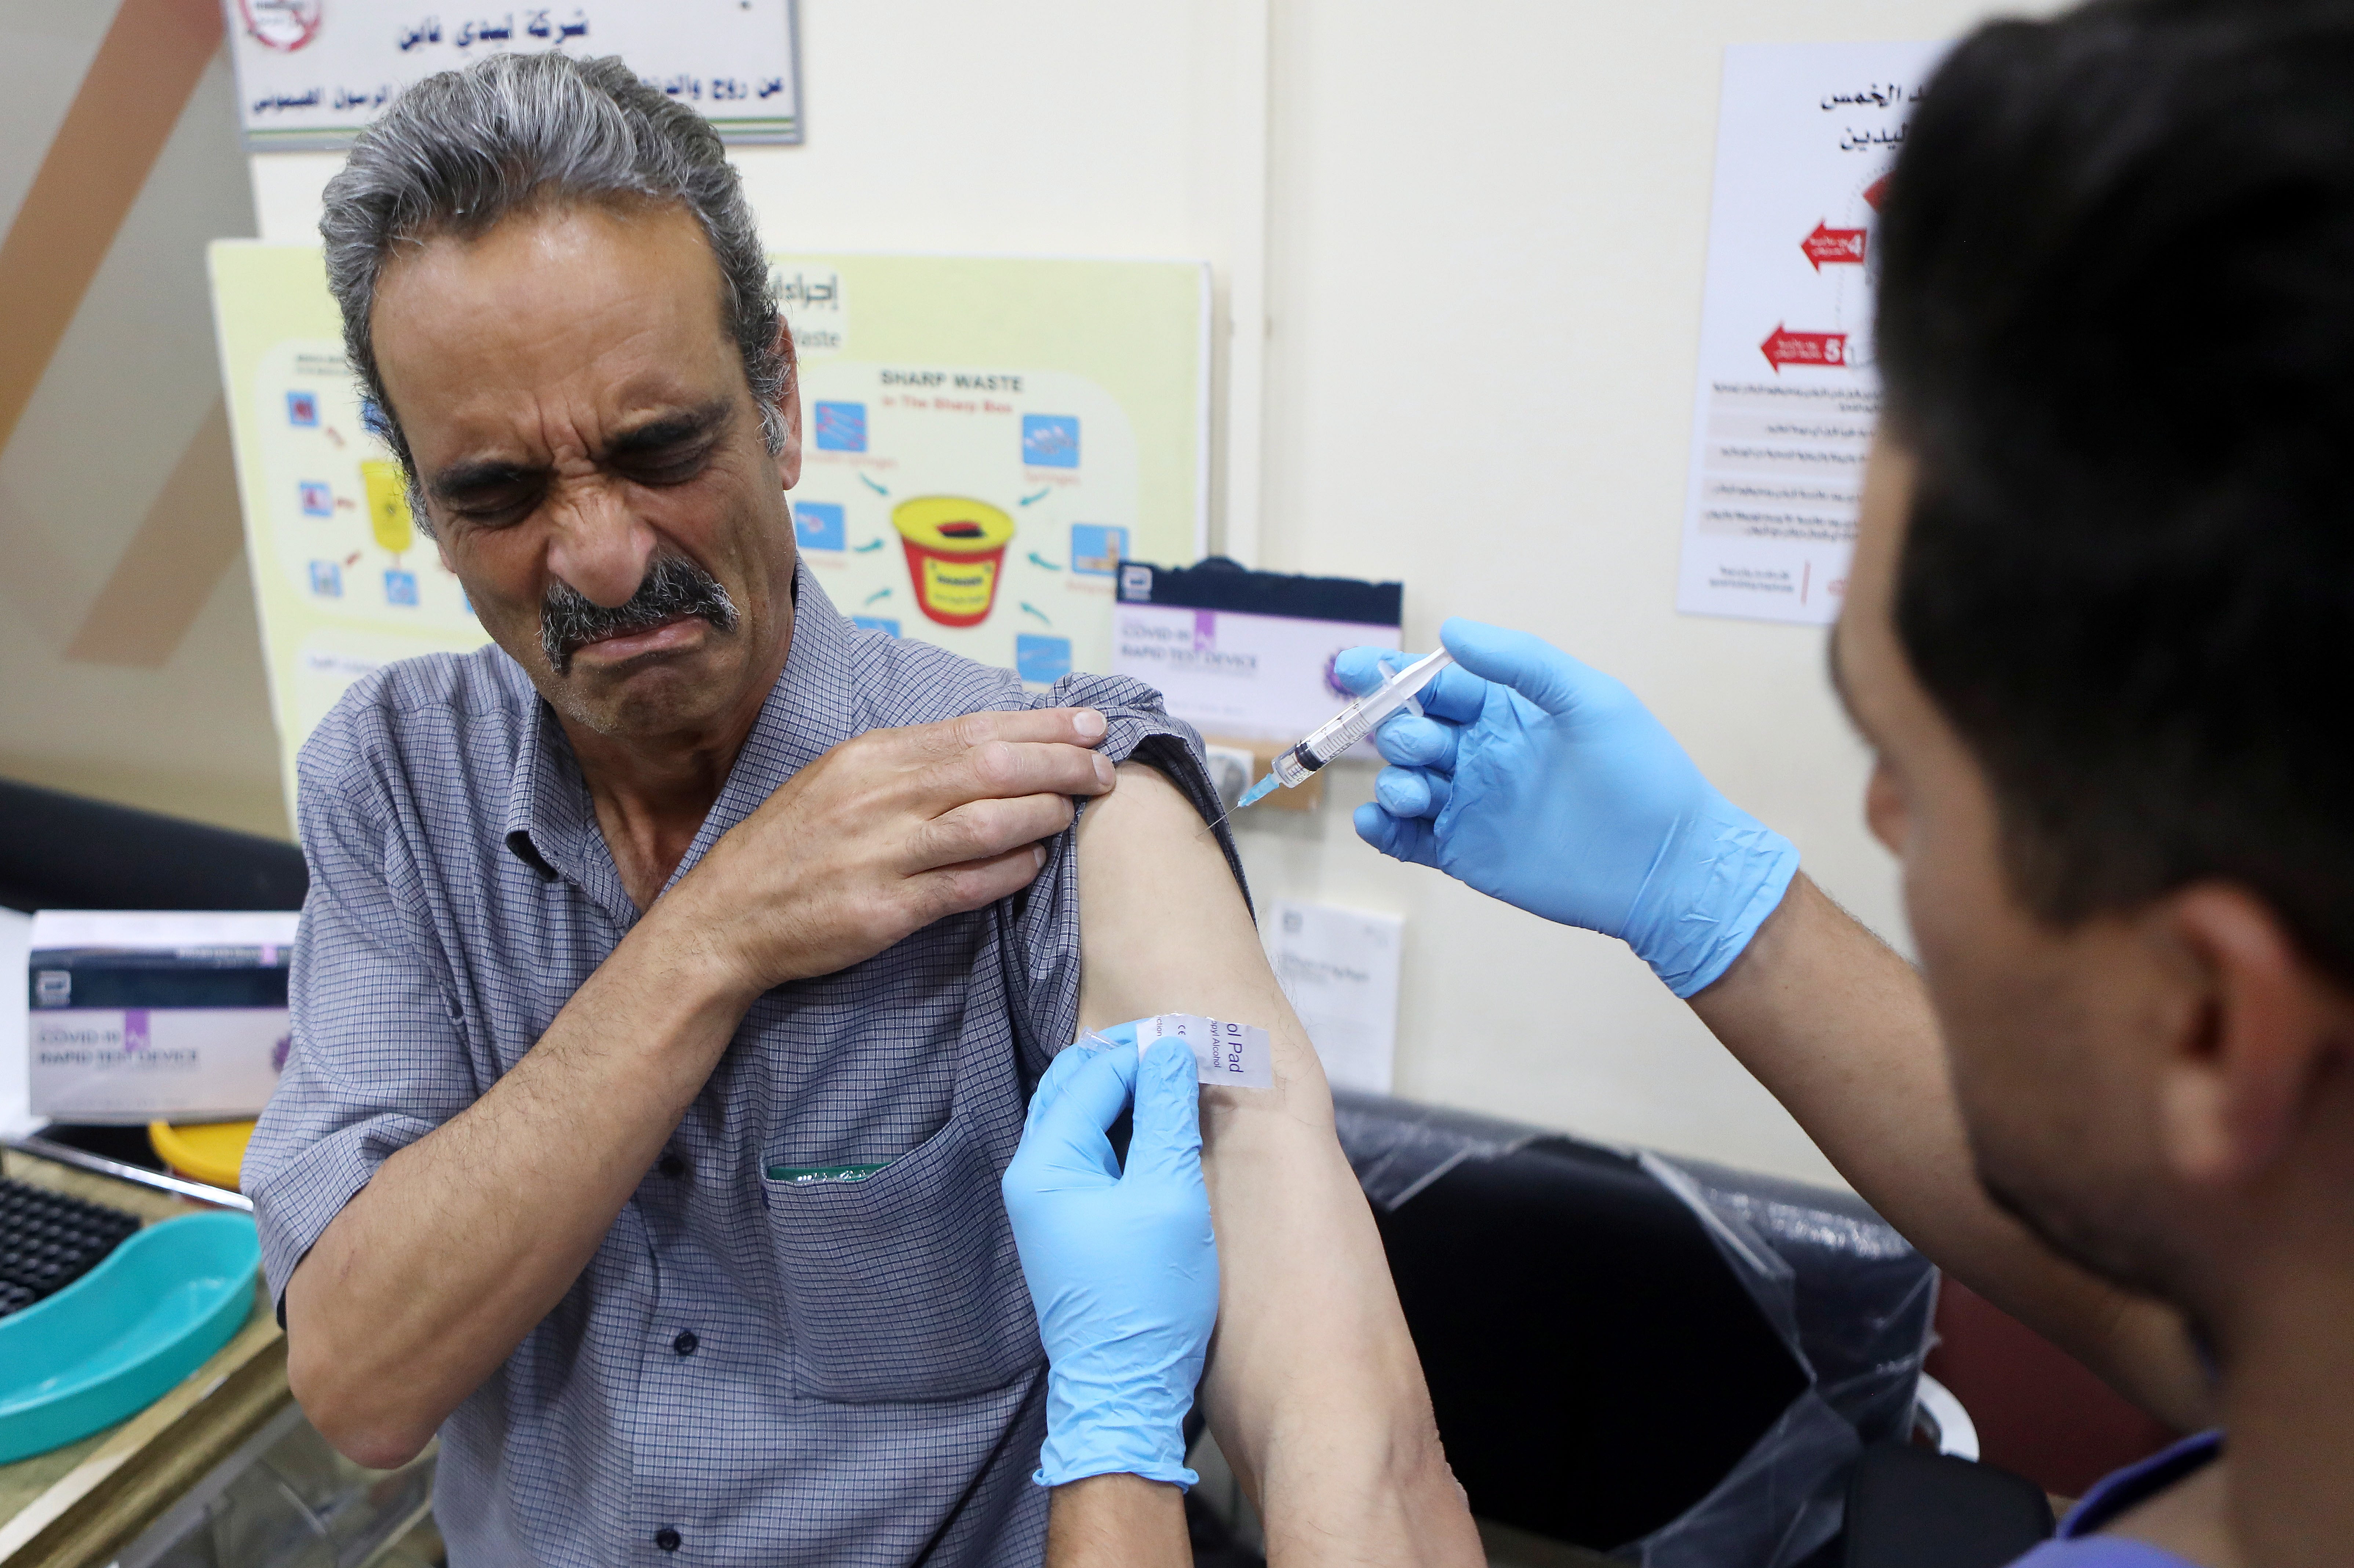 A Palestinian medical worker receives a Covid-19 vaccine at the Palestinian Red Crescent Hospital in the West Bank city of Hebron